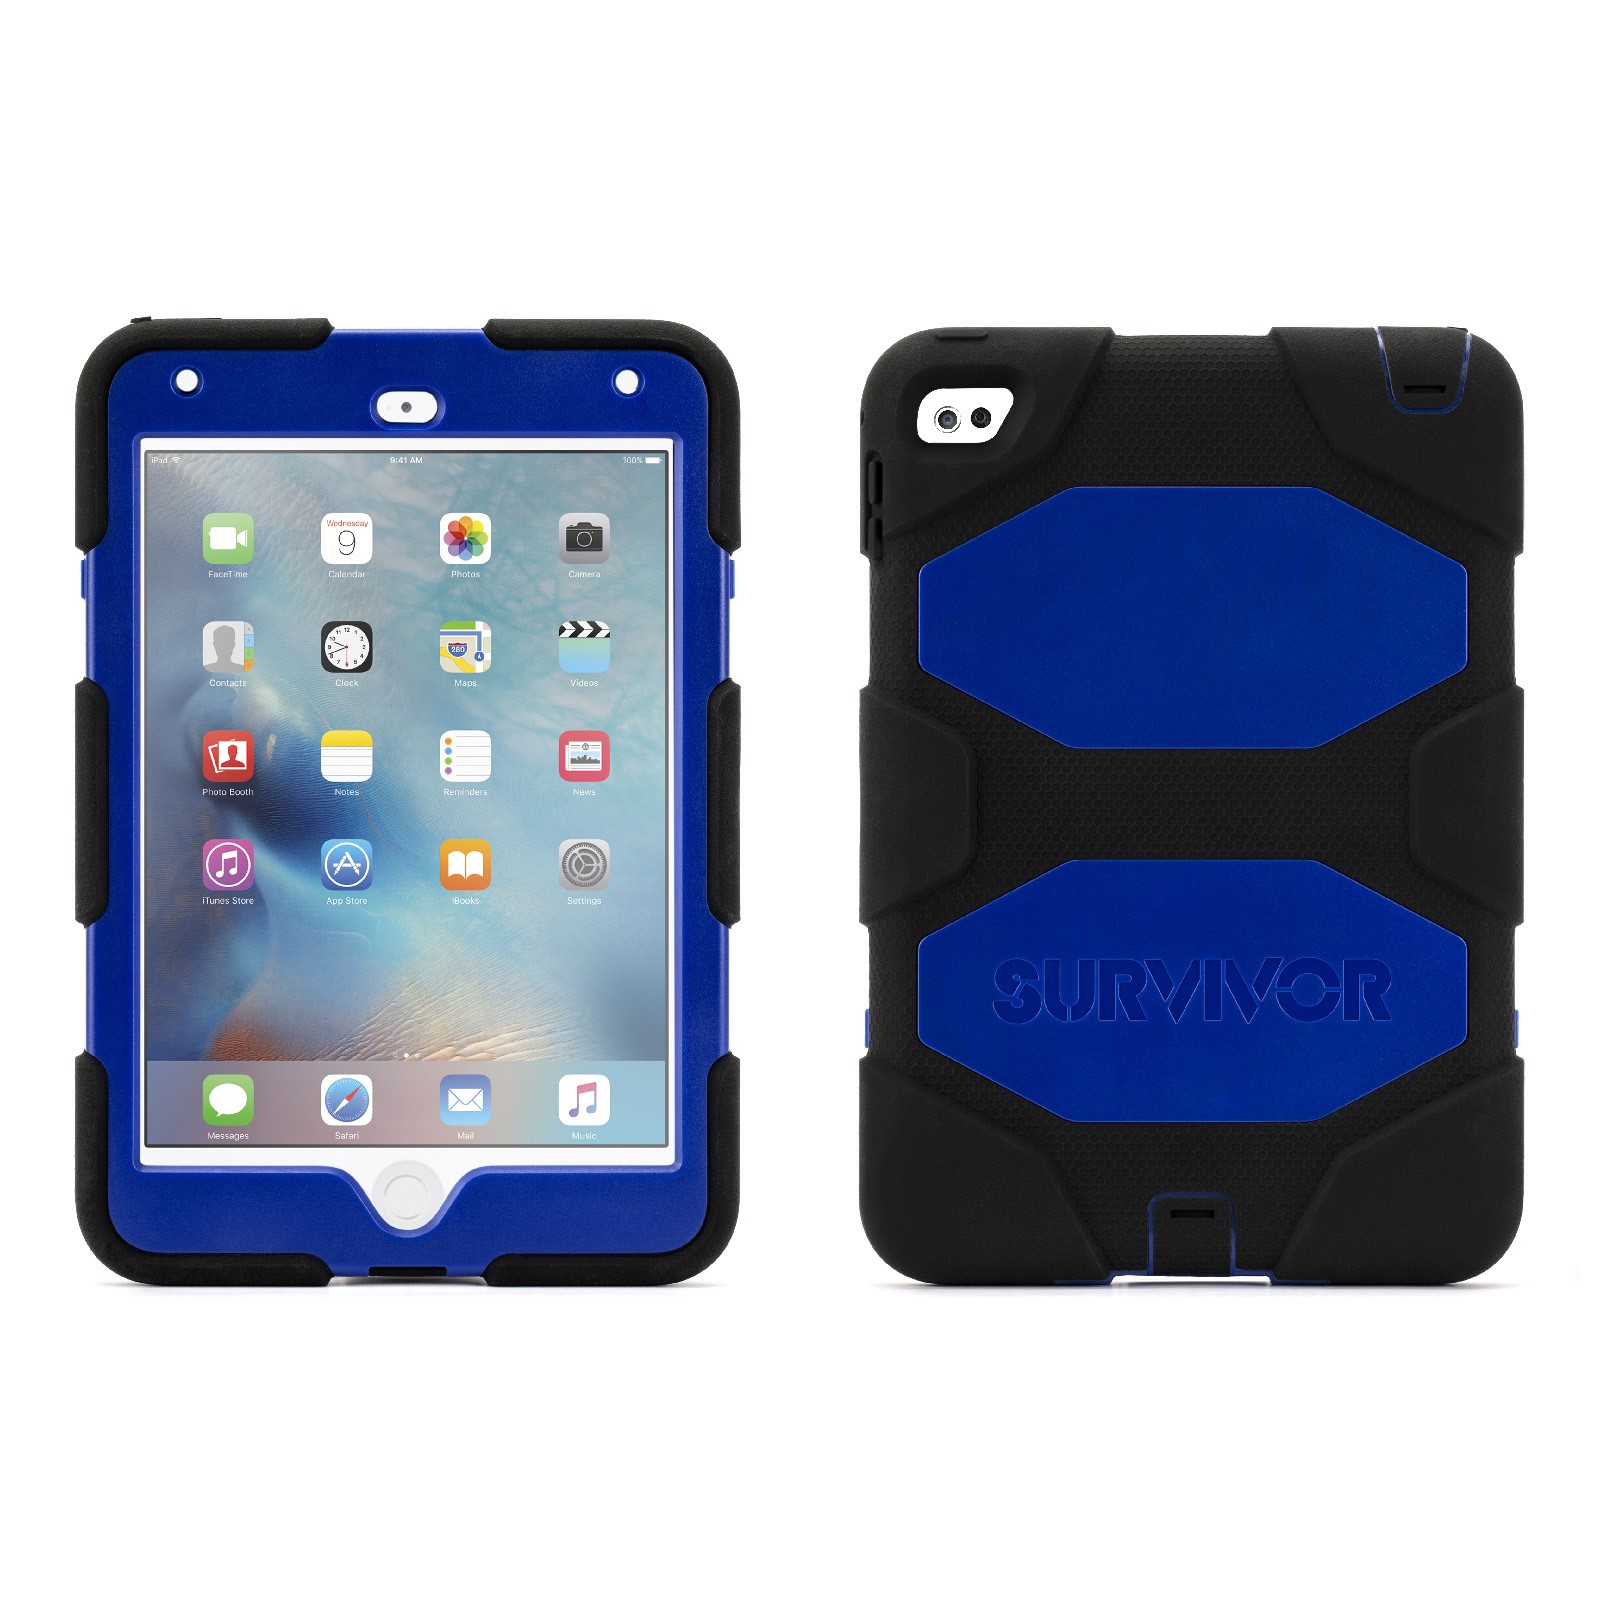 Griffin iPad mini 4 Case with Stand, Black and Blue Survivor All-Terrain, [Rugged] [Protective] [Dual Layer] [Heavy Duty] [Shock Absorption] [Polycarbonate] [Silicone] - image 1 of 2